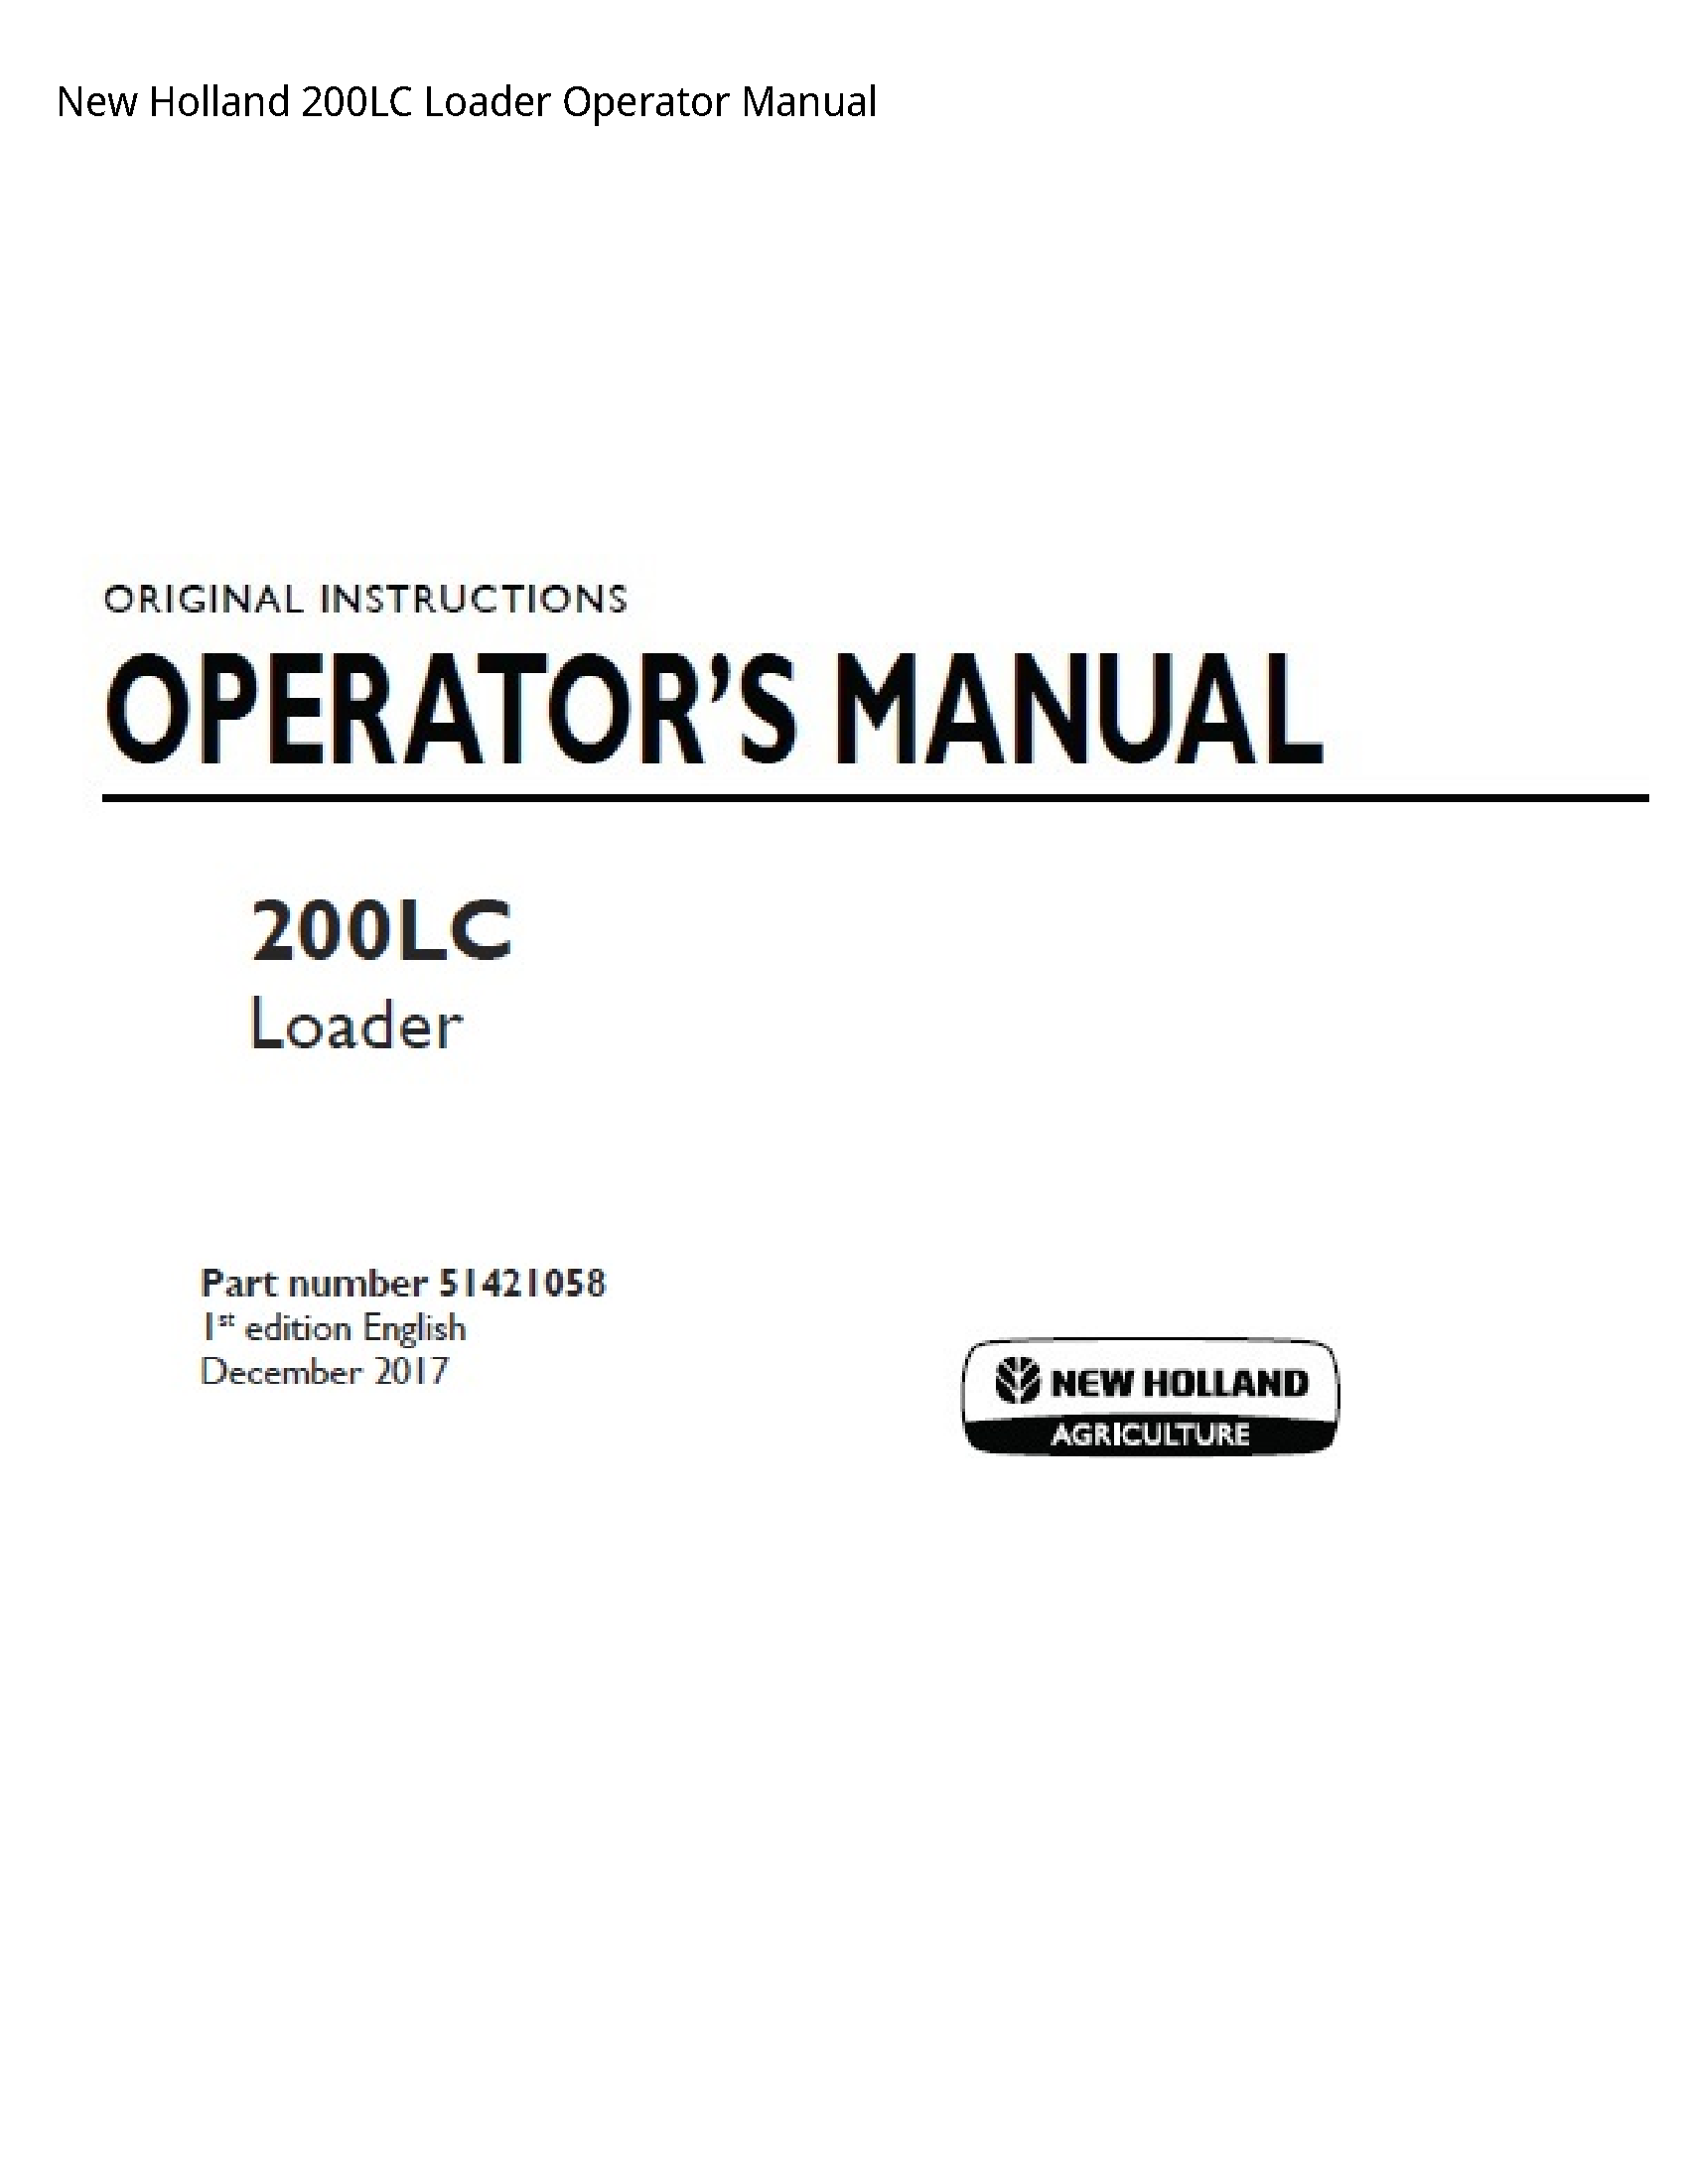 New Holland 200LC Loader Operator manual